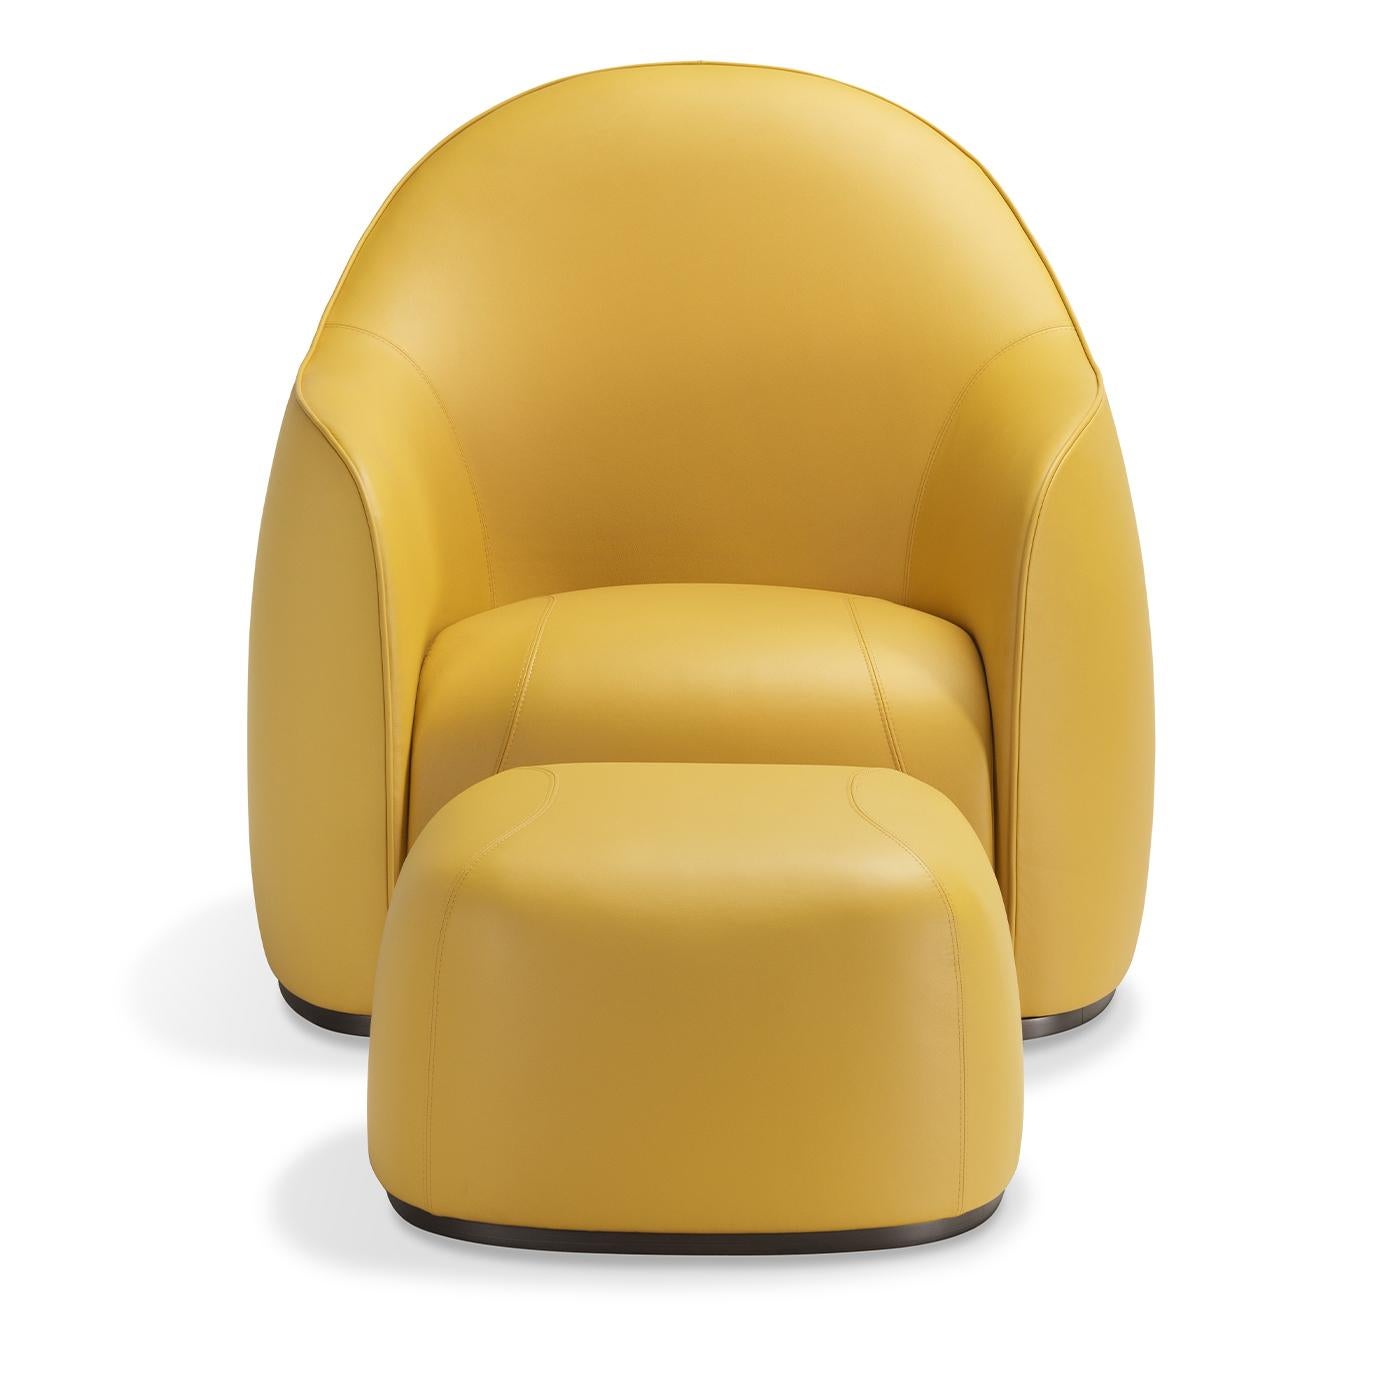 Soft curves and harmonious proportions define the silhouette of the armchair and pouf making up this set. Both upholstered in smooth, mustard-hued leather for a luxe and inebriating seating experience, they feature generous padding that outlines